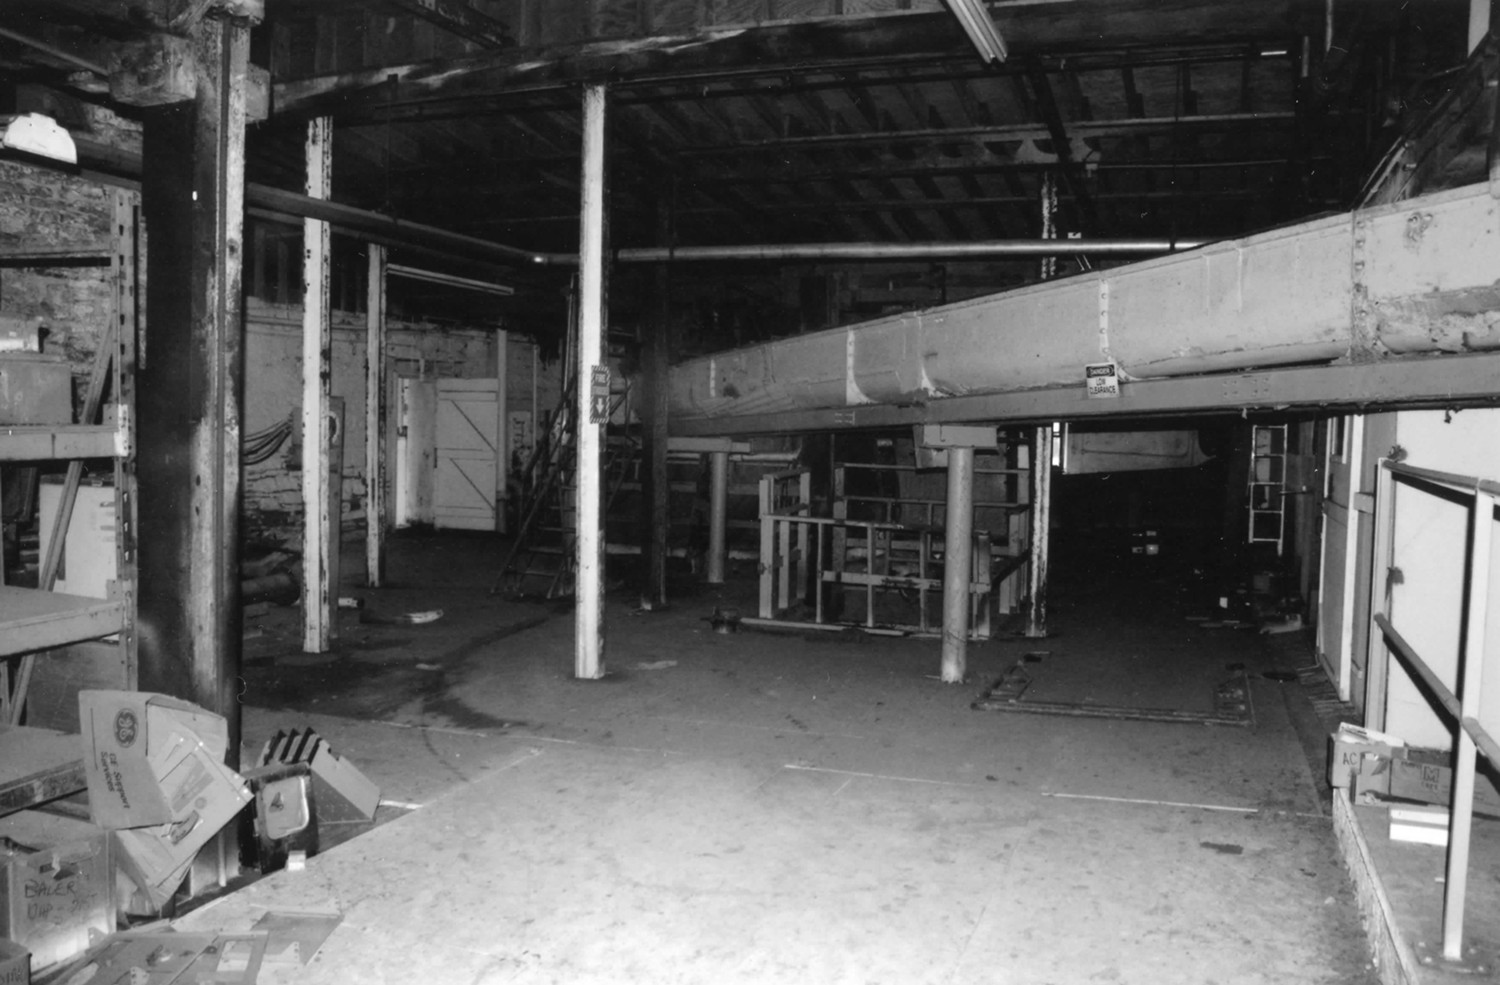 Adams Bag Company Paper Mill and Sack Factory, Chagrin Falls Ohio First Floor, Building 1D, looking south (2012)